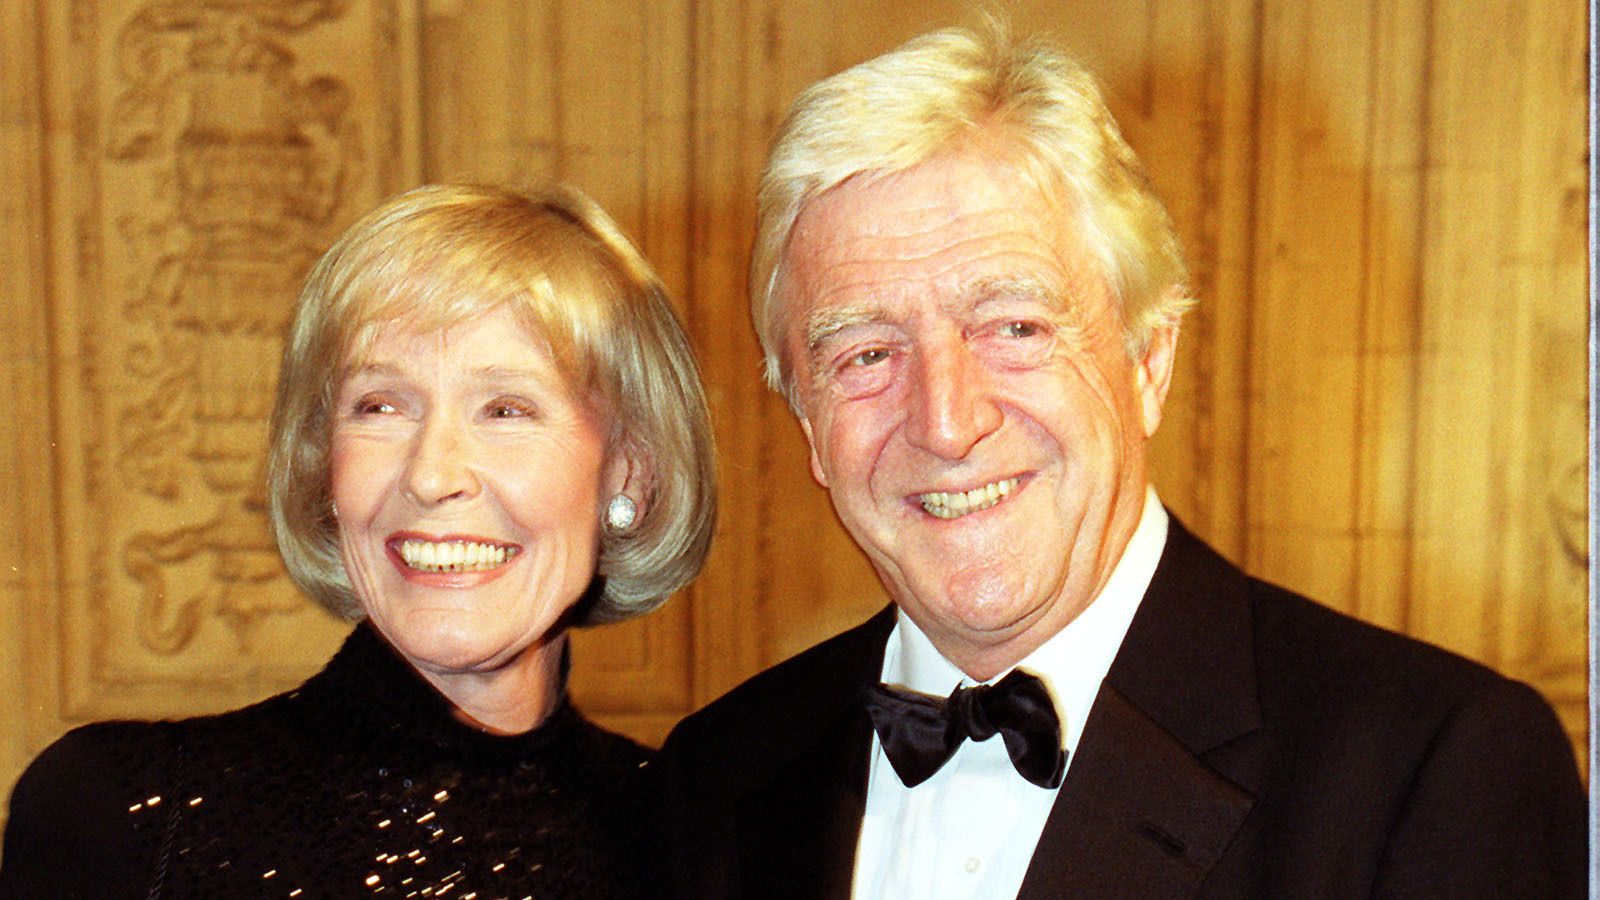 Sir Michael Parkinson's son says he wouldn't have been a TV star without his wife Mary's 'moral compass'